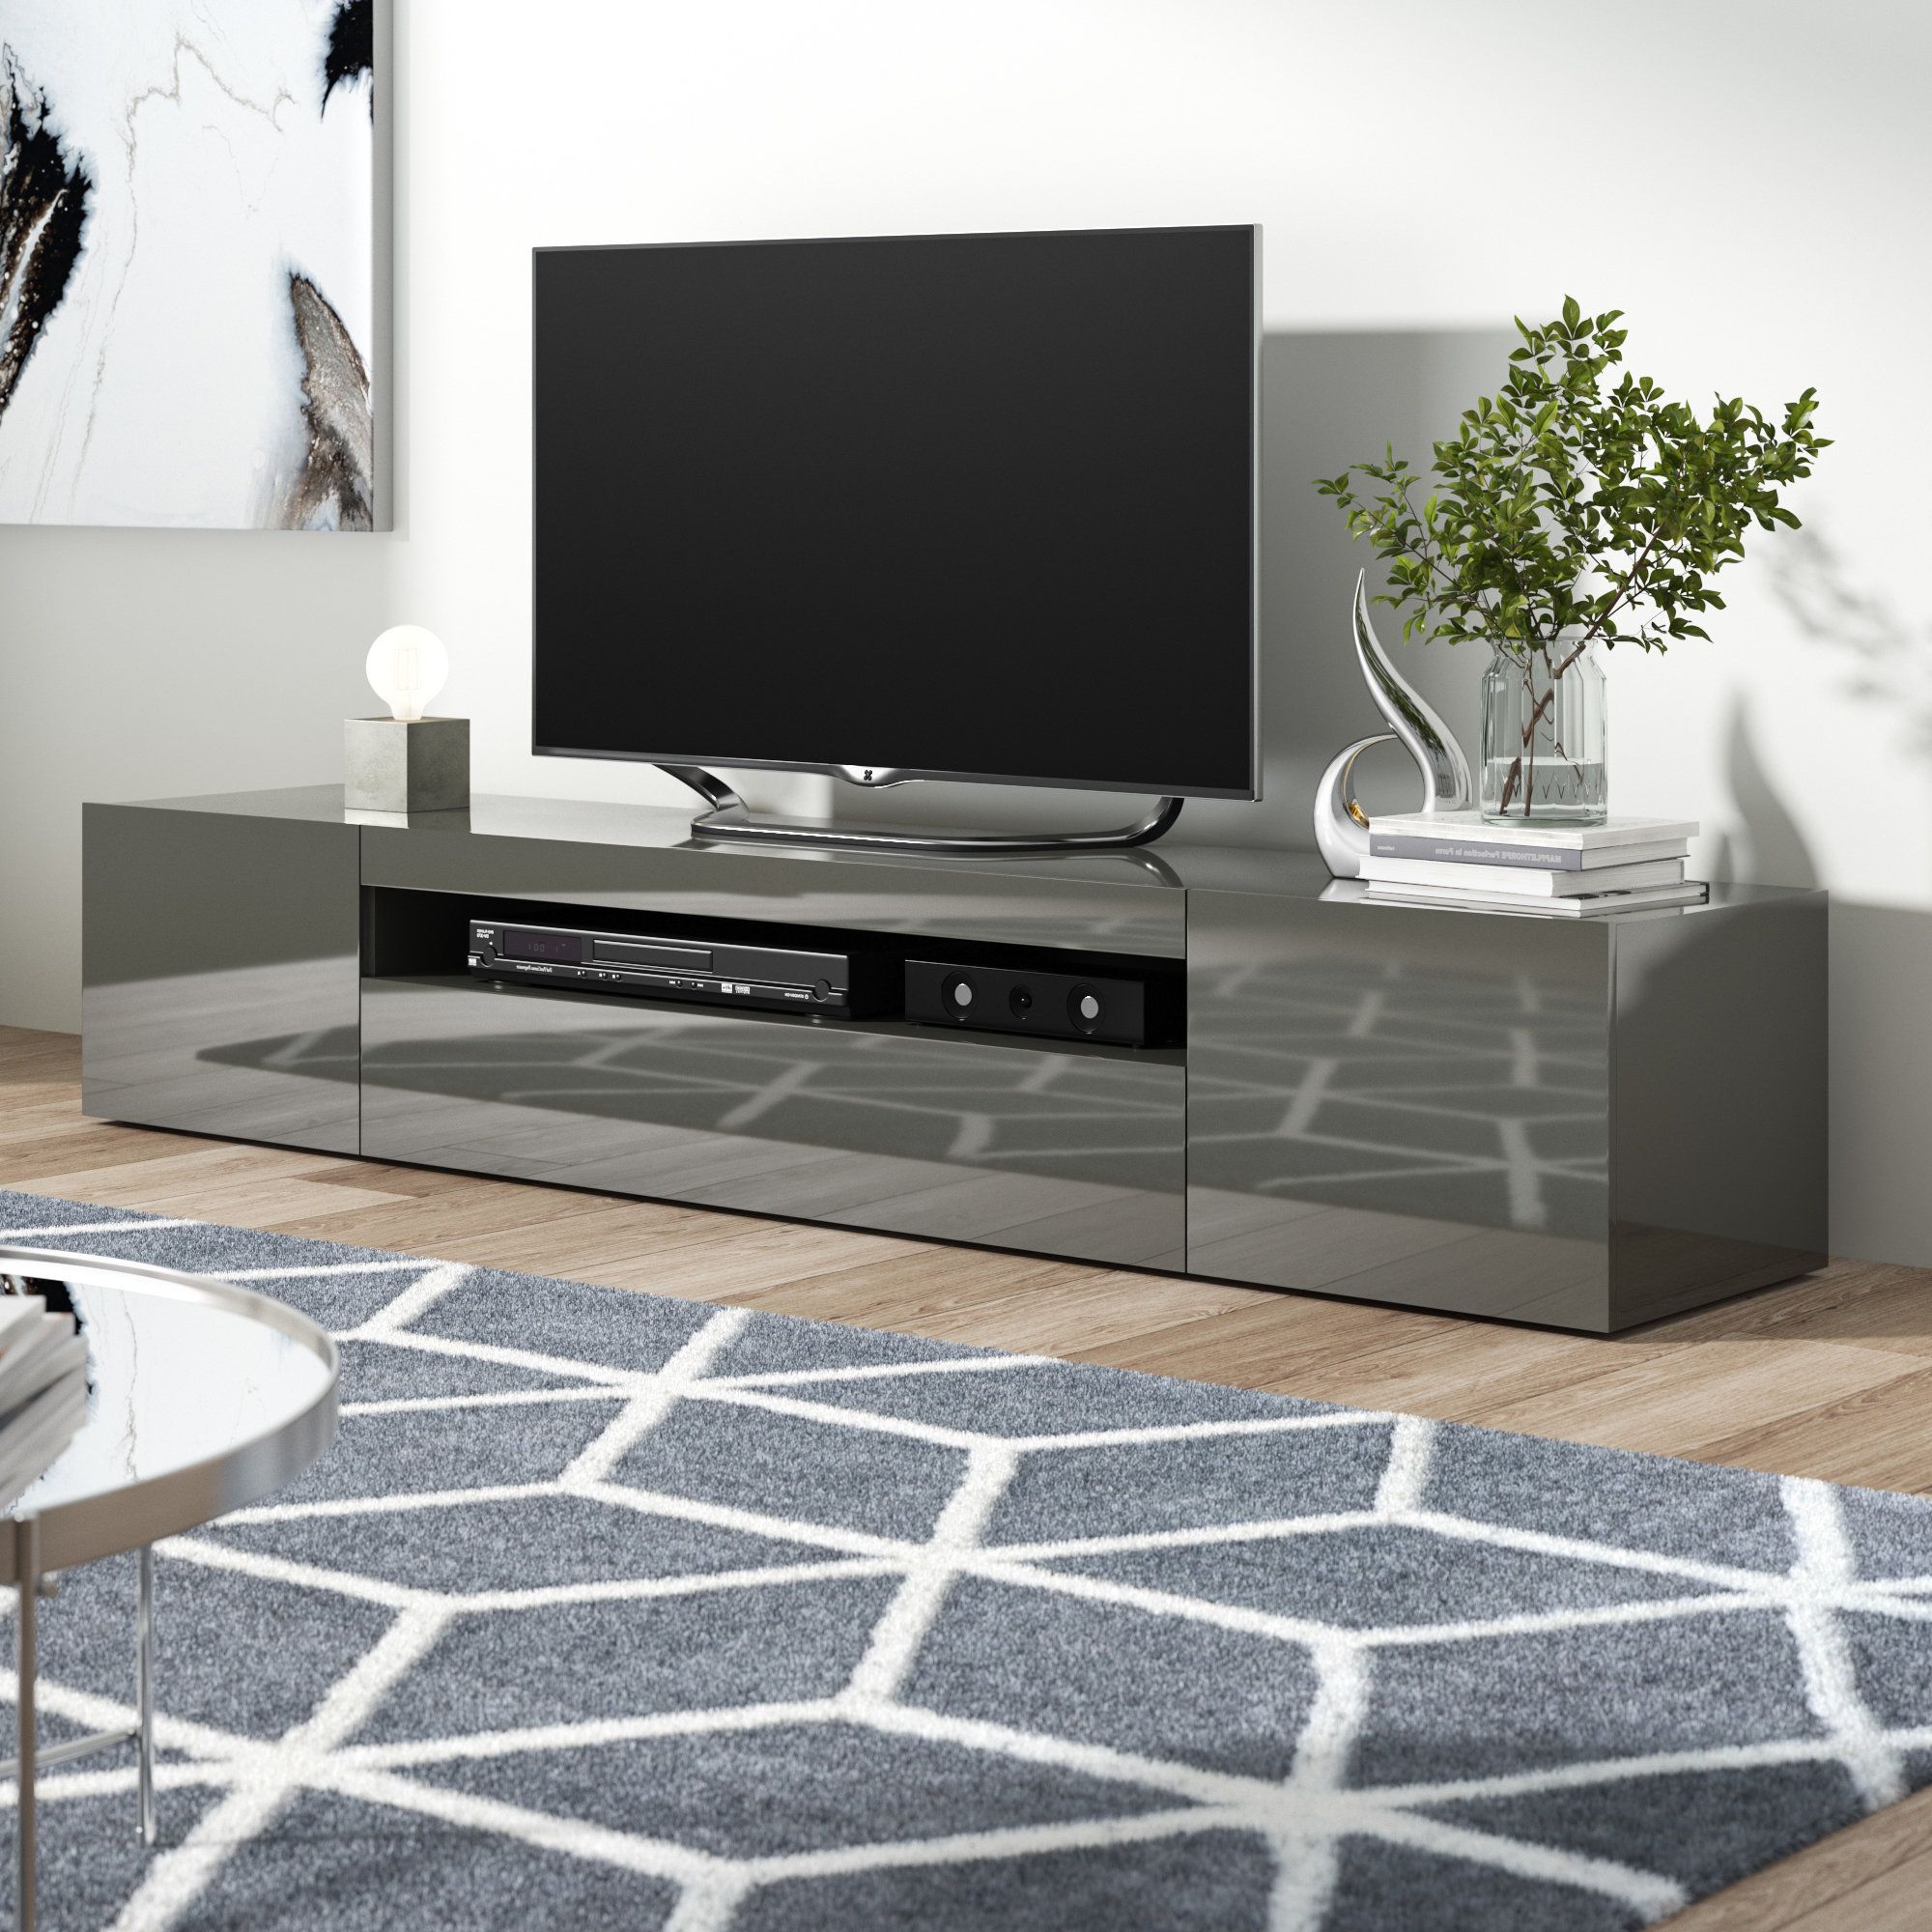 Best And Newest Hokku Tv Stand (View 5 of 20)